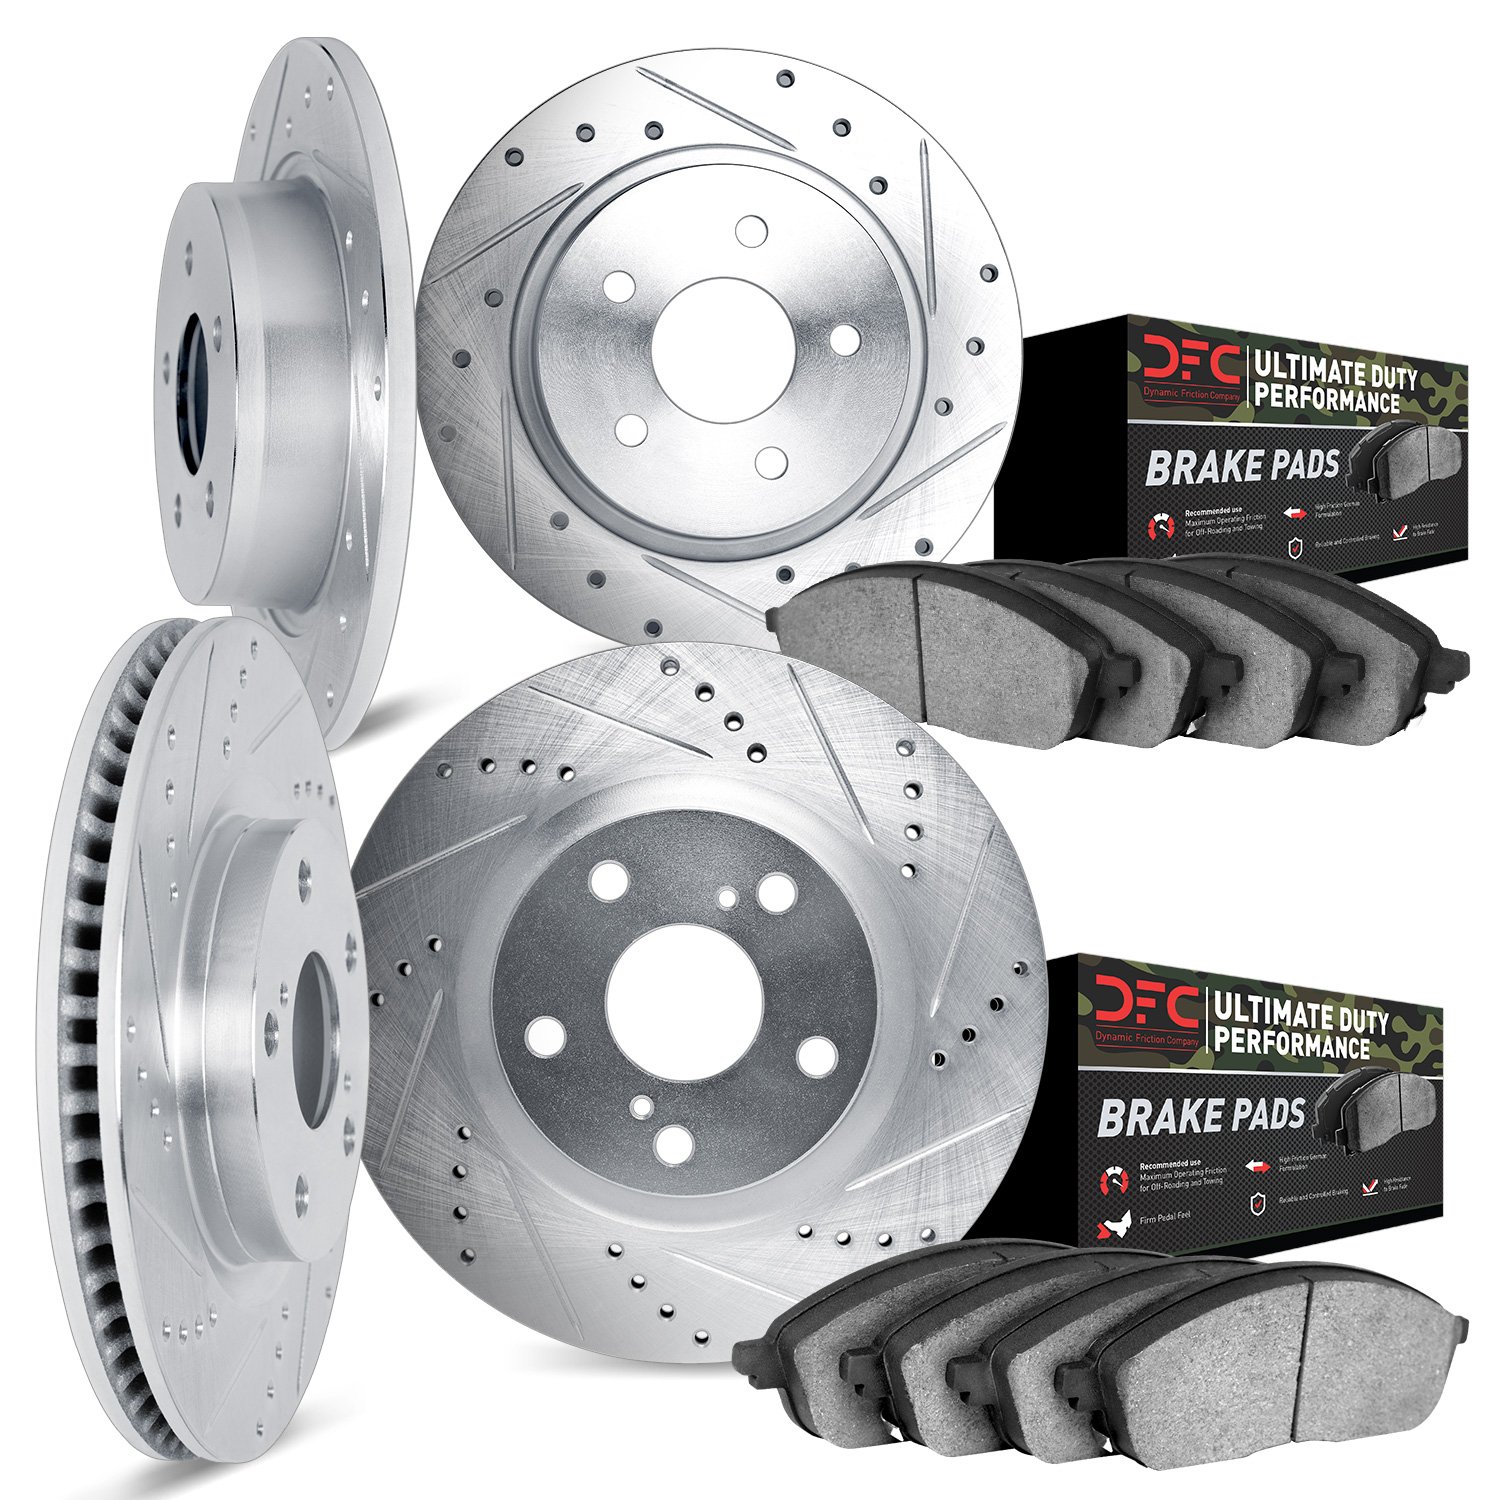 7404-42008 Drilled/Slotted Brake Rotors with Ultimate-Duty Brake Pads Kit [Silver], Fits Select Mopar, Position: Front and Rear